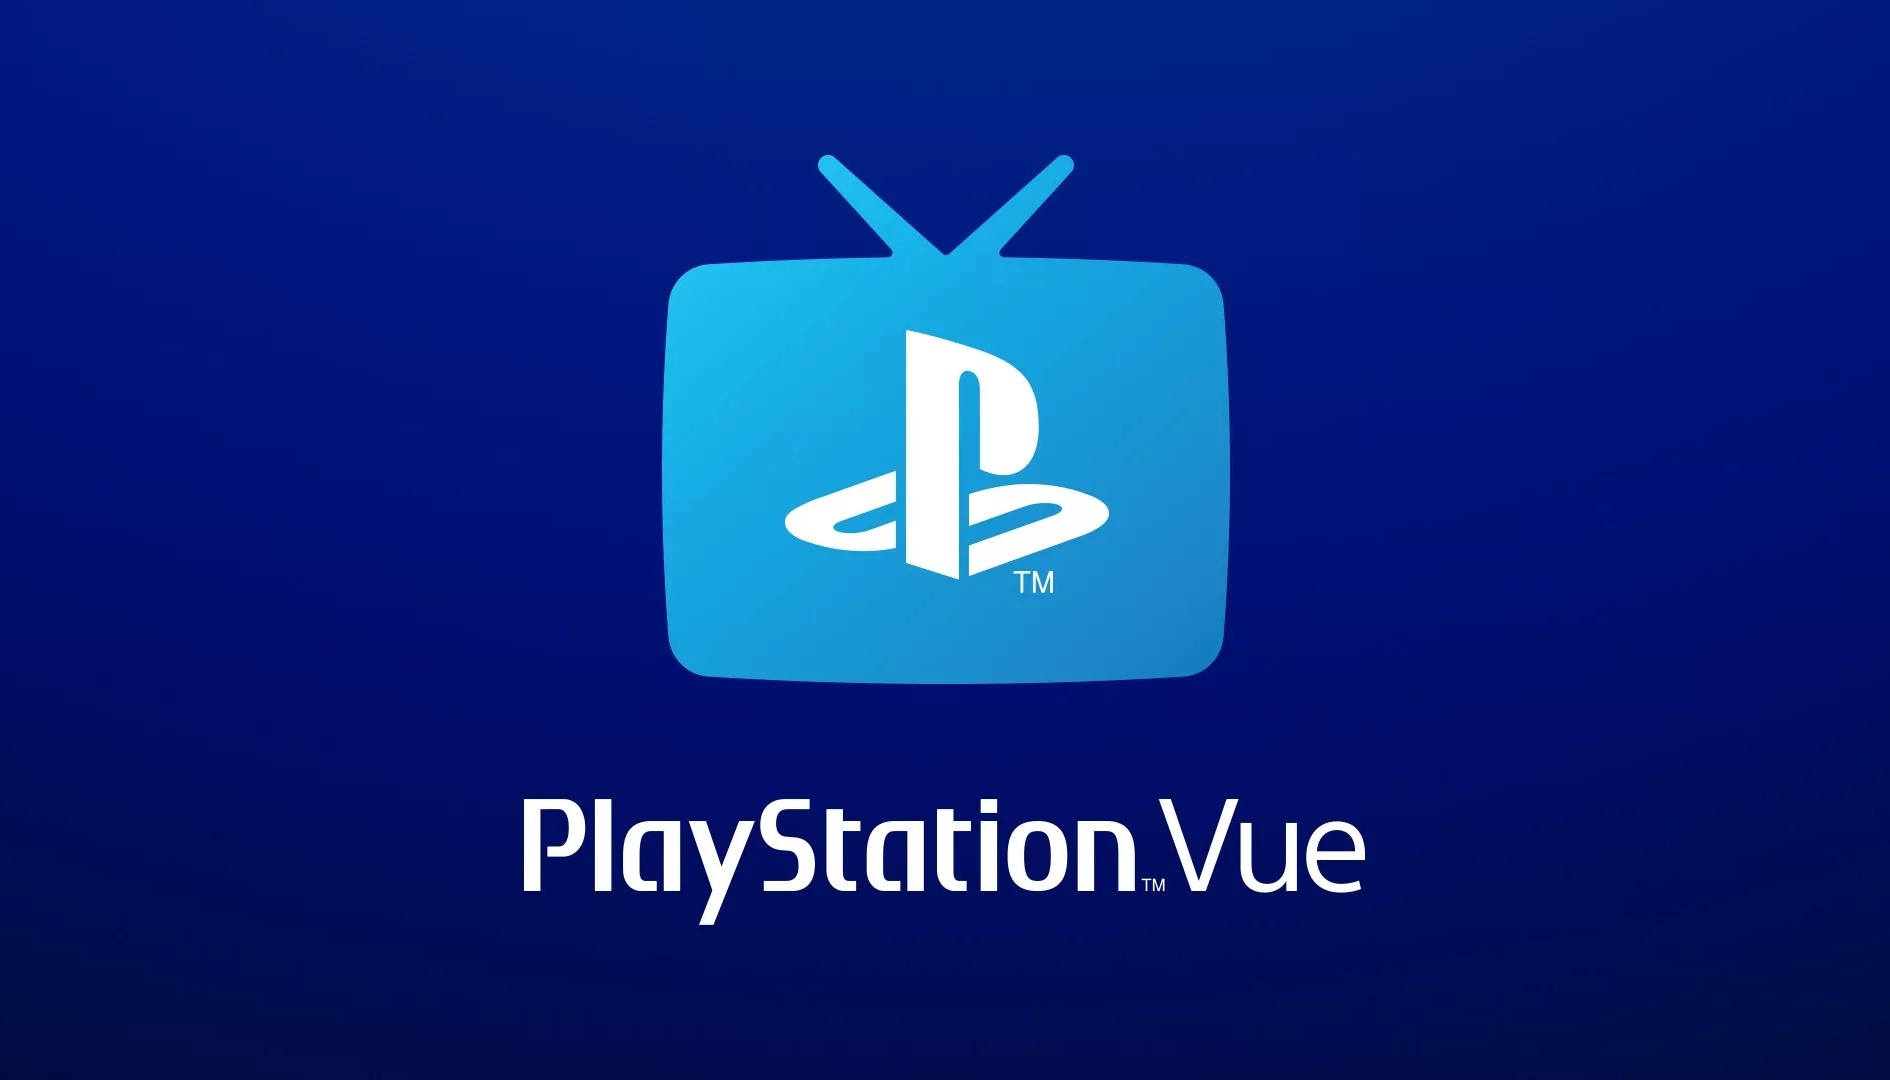 Sony chiude Playstation Vue